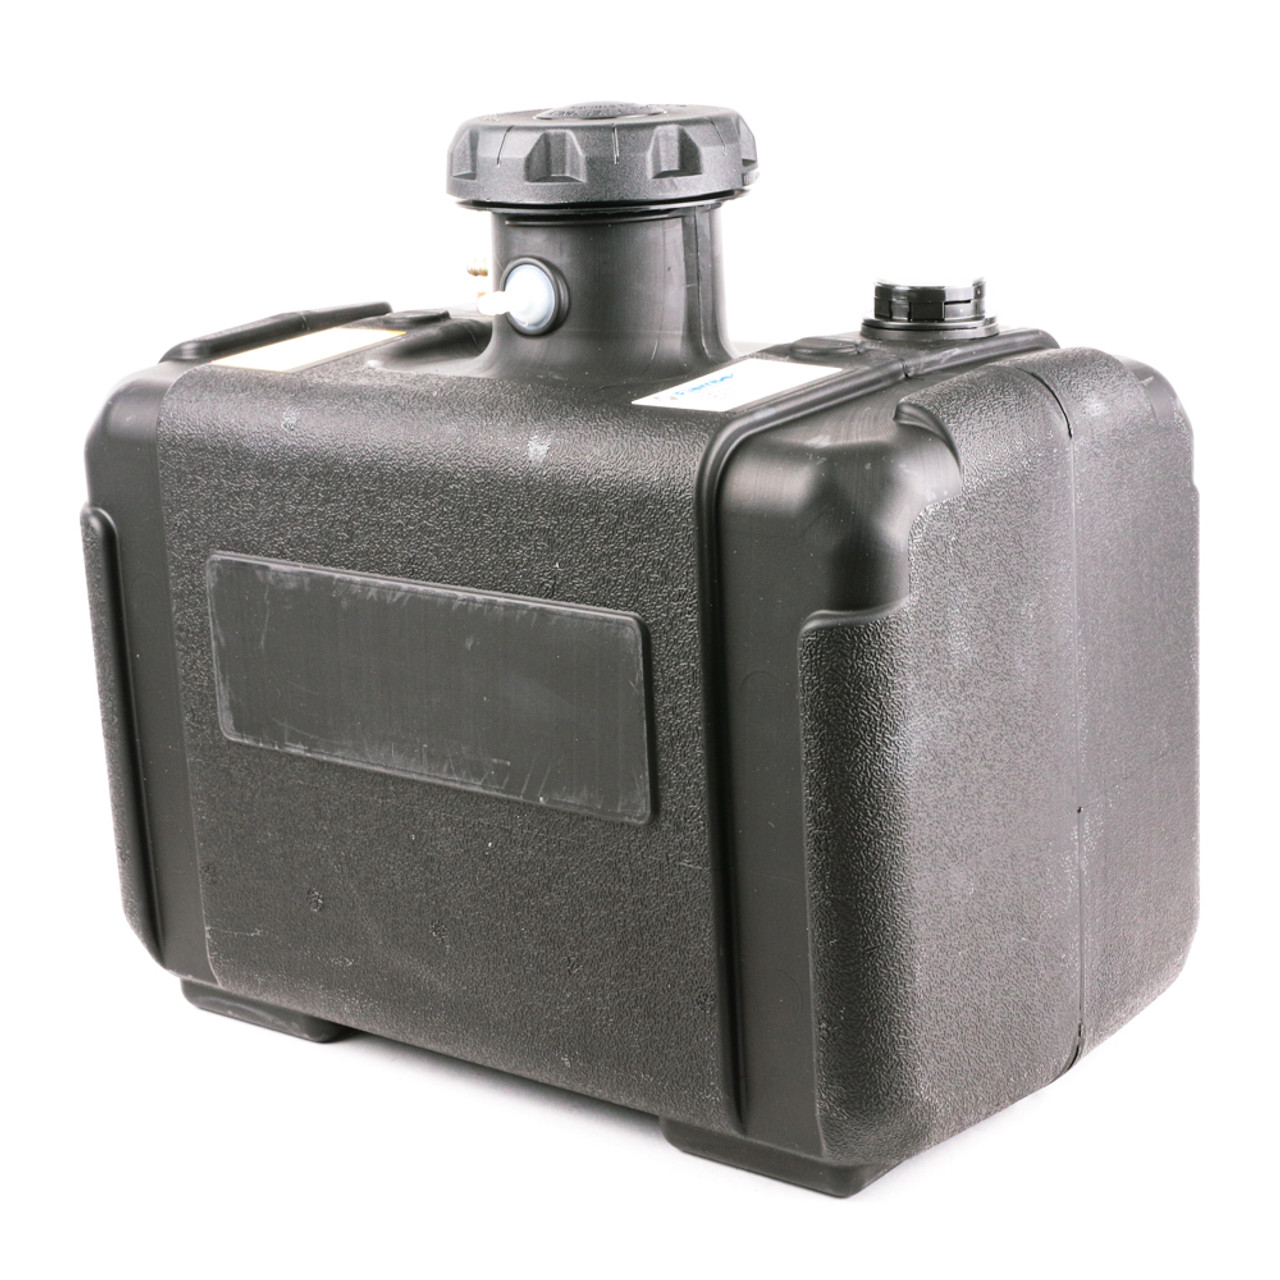 5 Gallon Fuel Tank: Complete Assembly